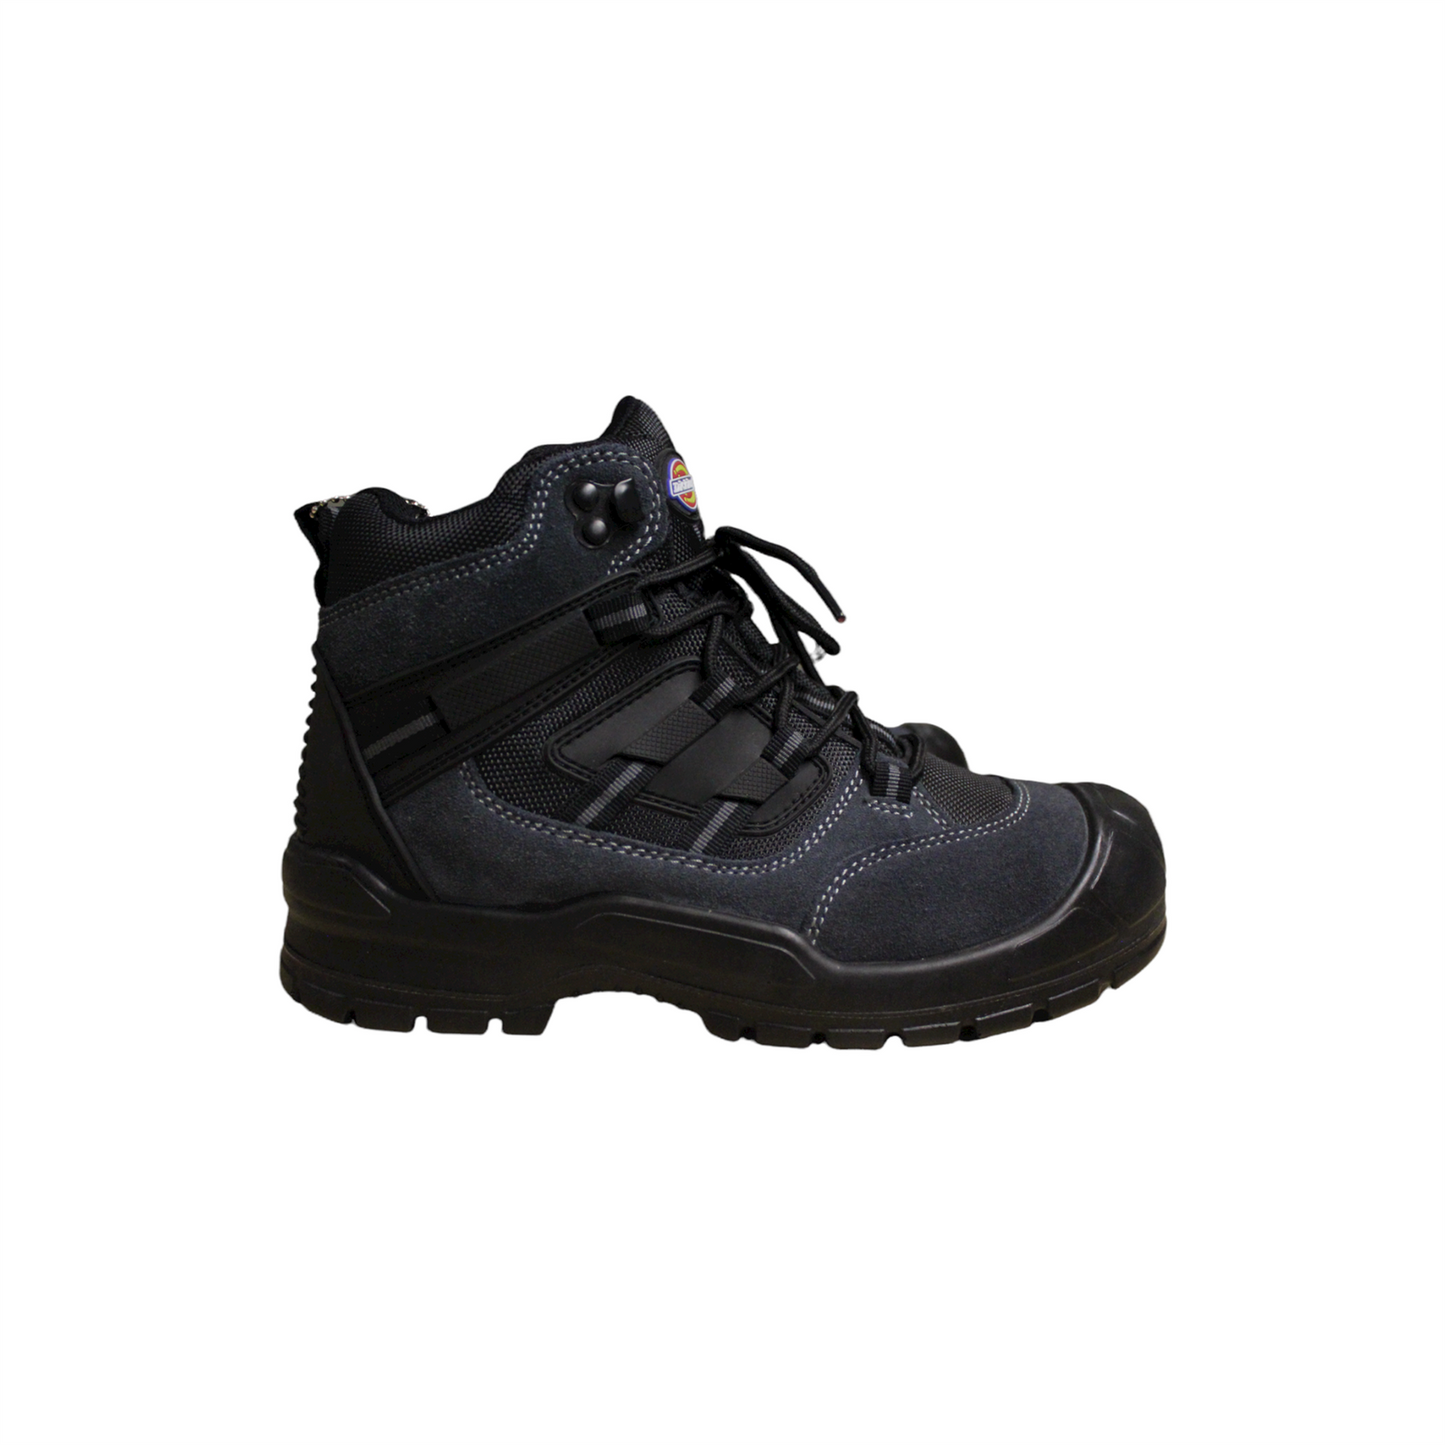 Dickies Everyday safety work boot black/red black/grey FA24/7B WD591M